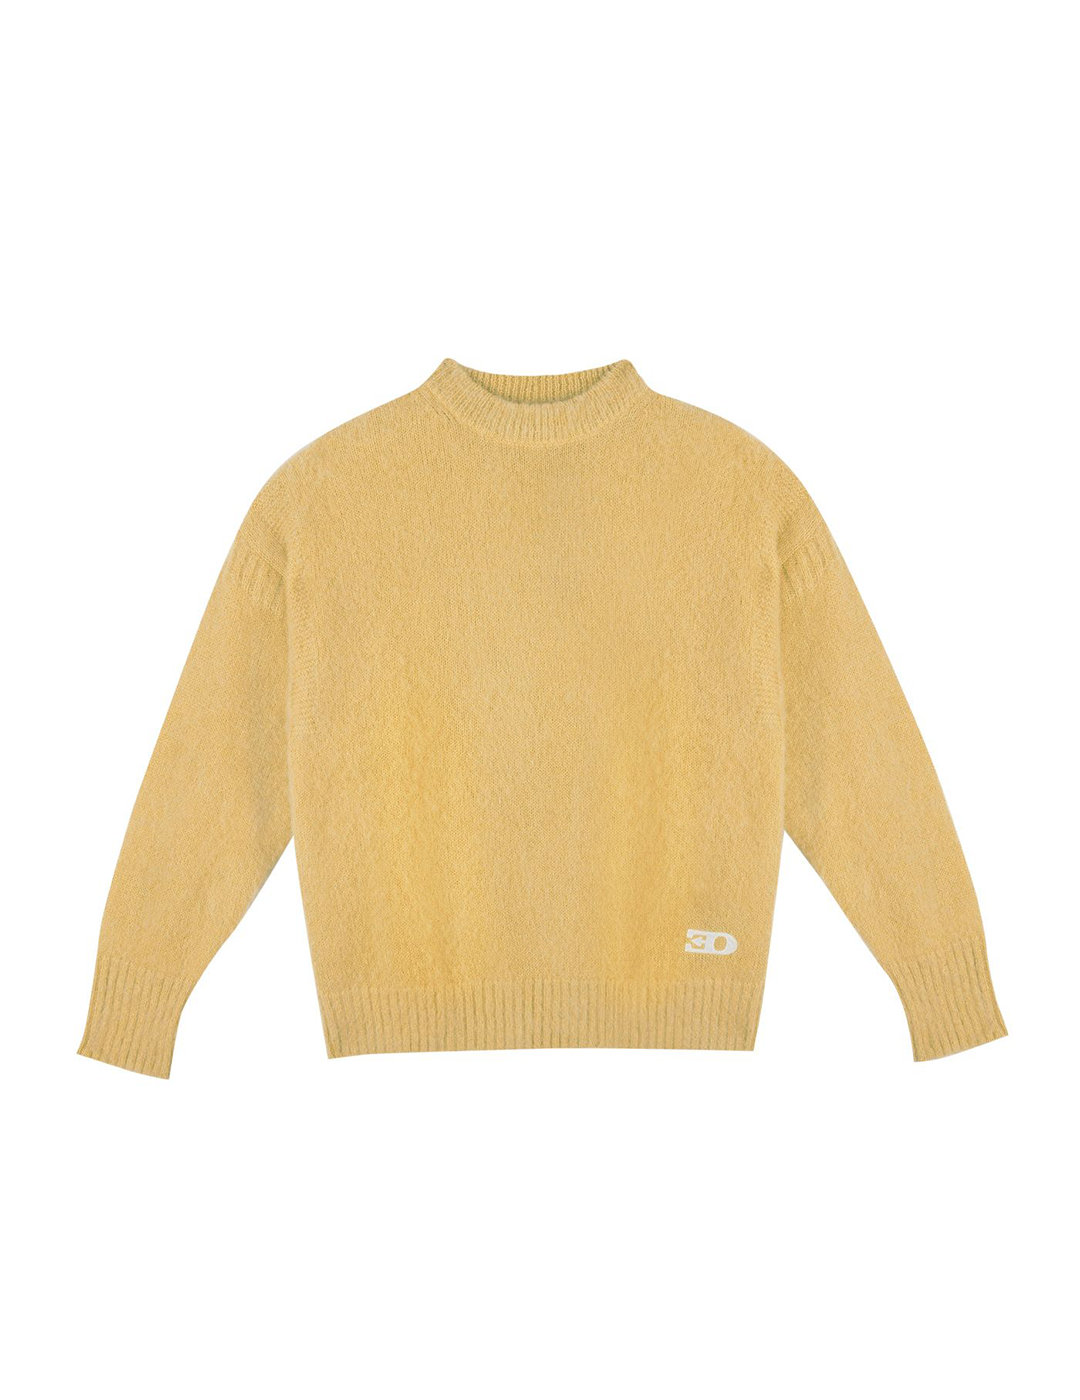 THE GUERNSEY JUMPER IN YELLOW MOHAIR